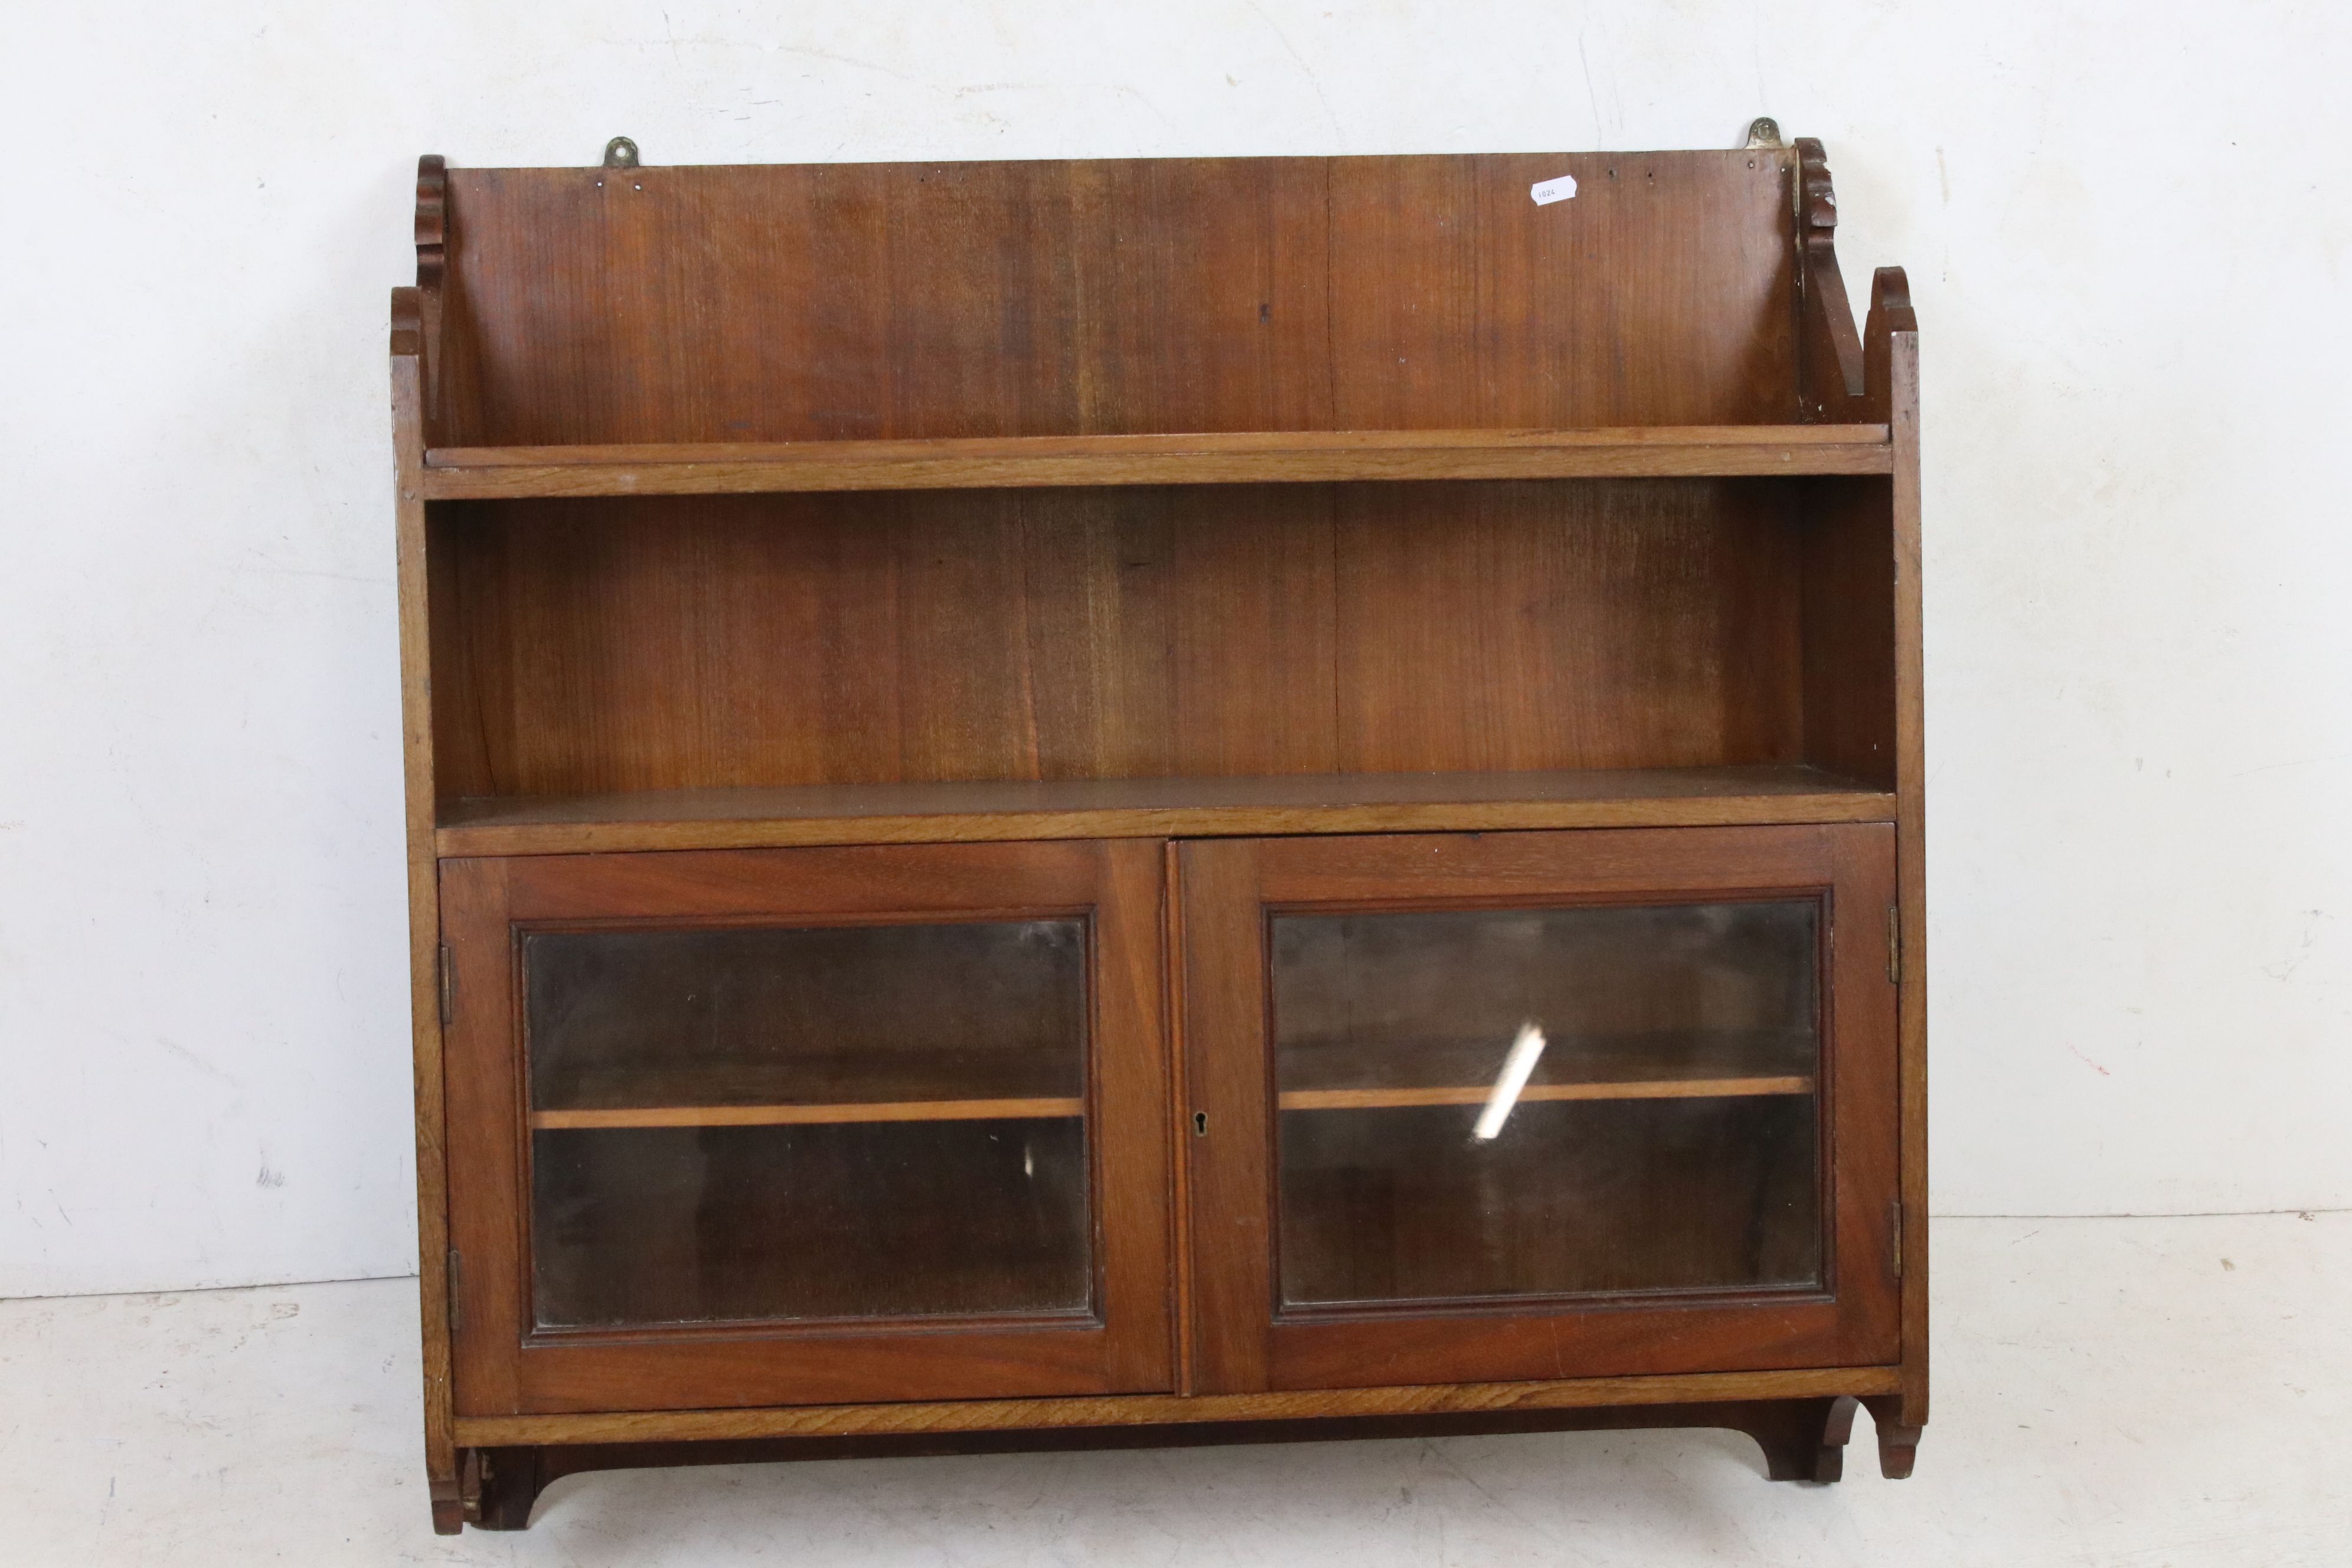 Late 19th / Early 20th century Gothic Mahogany Hanging Cabinet with two shelves over two glazed